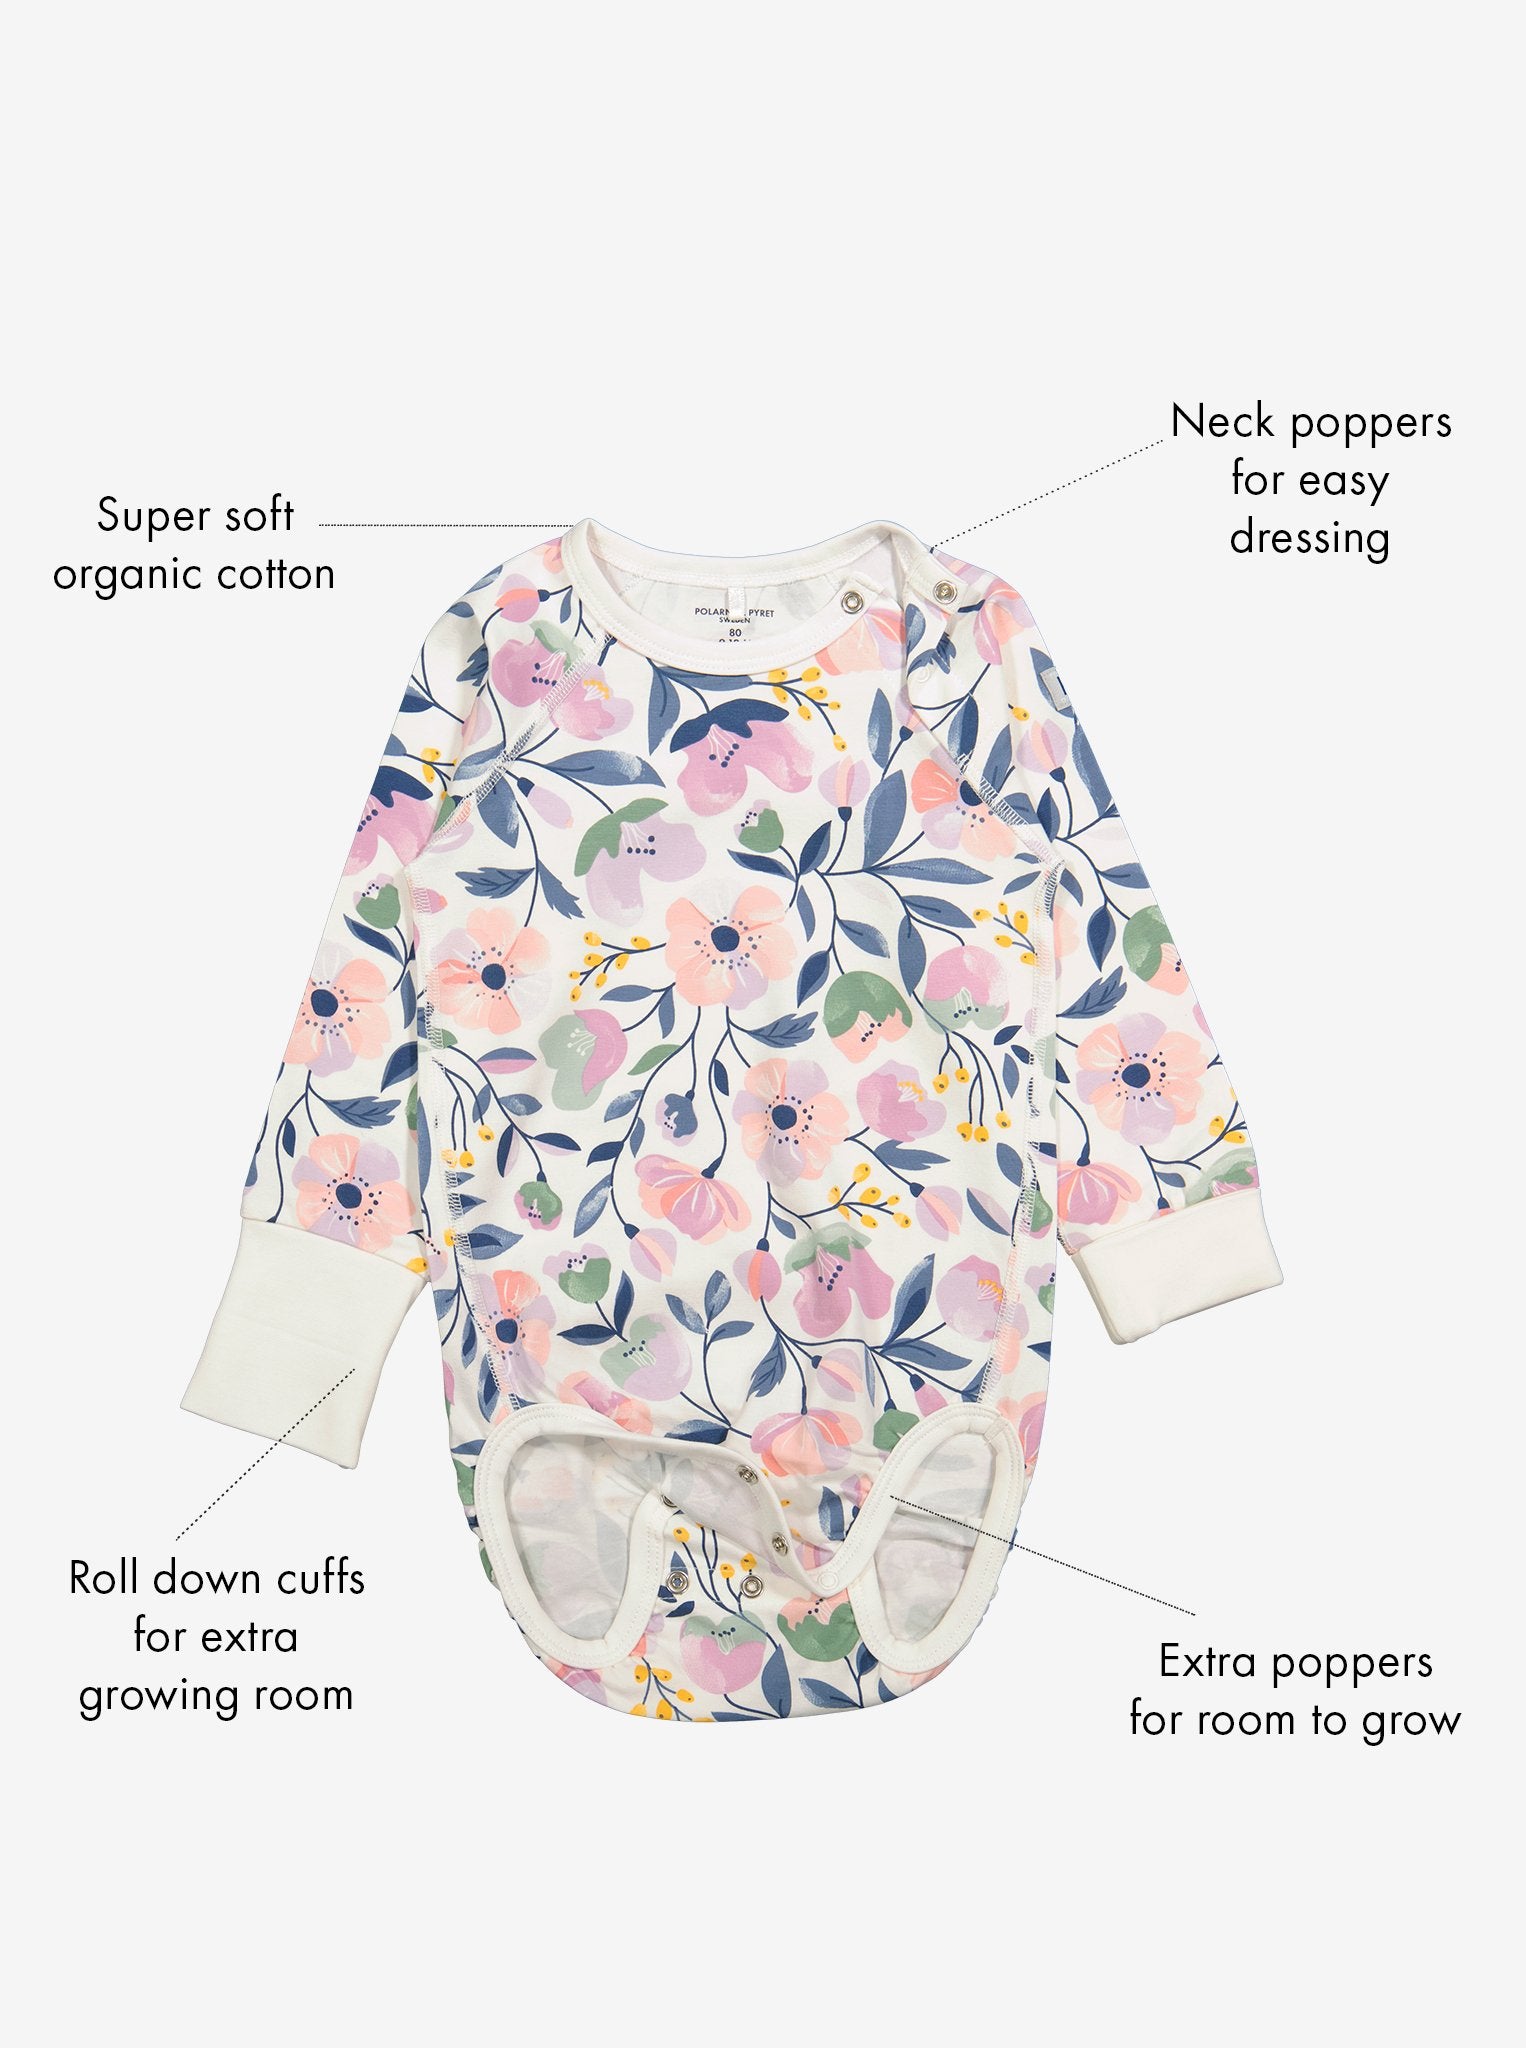  Organic White Floral Babygrow from Polarn O. Pyret Kidswear. Made from eco-friendly materials.